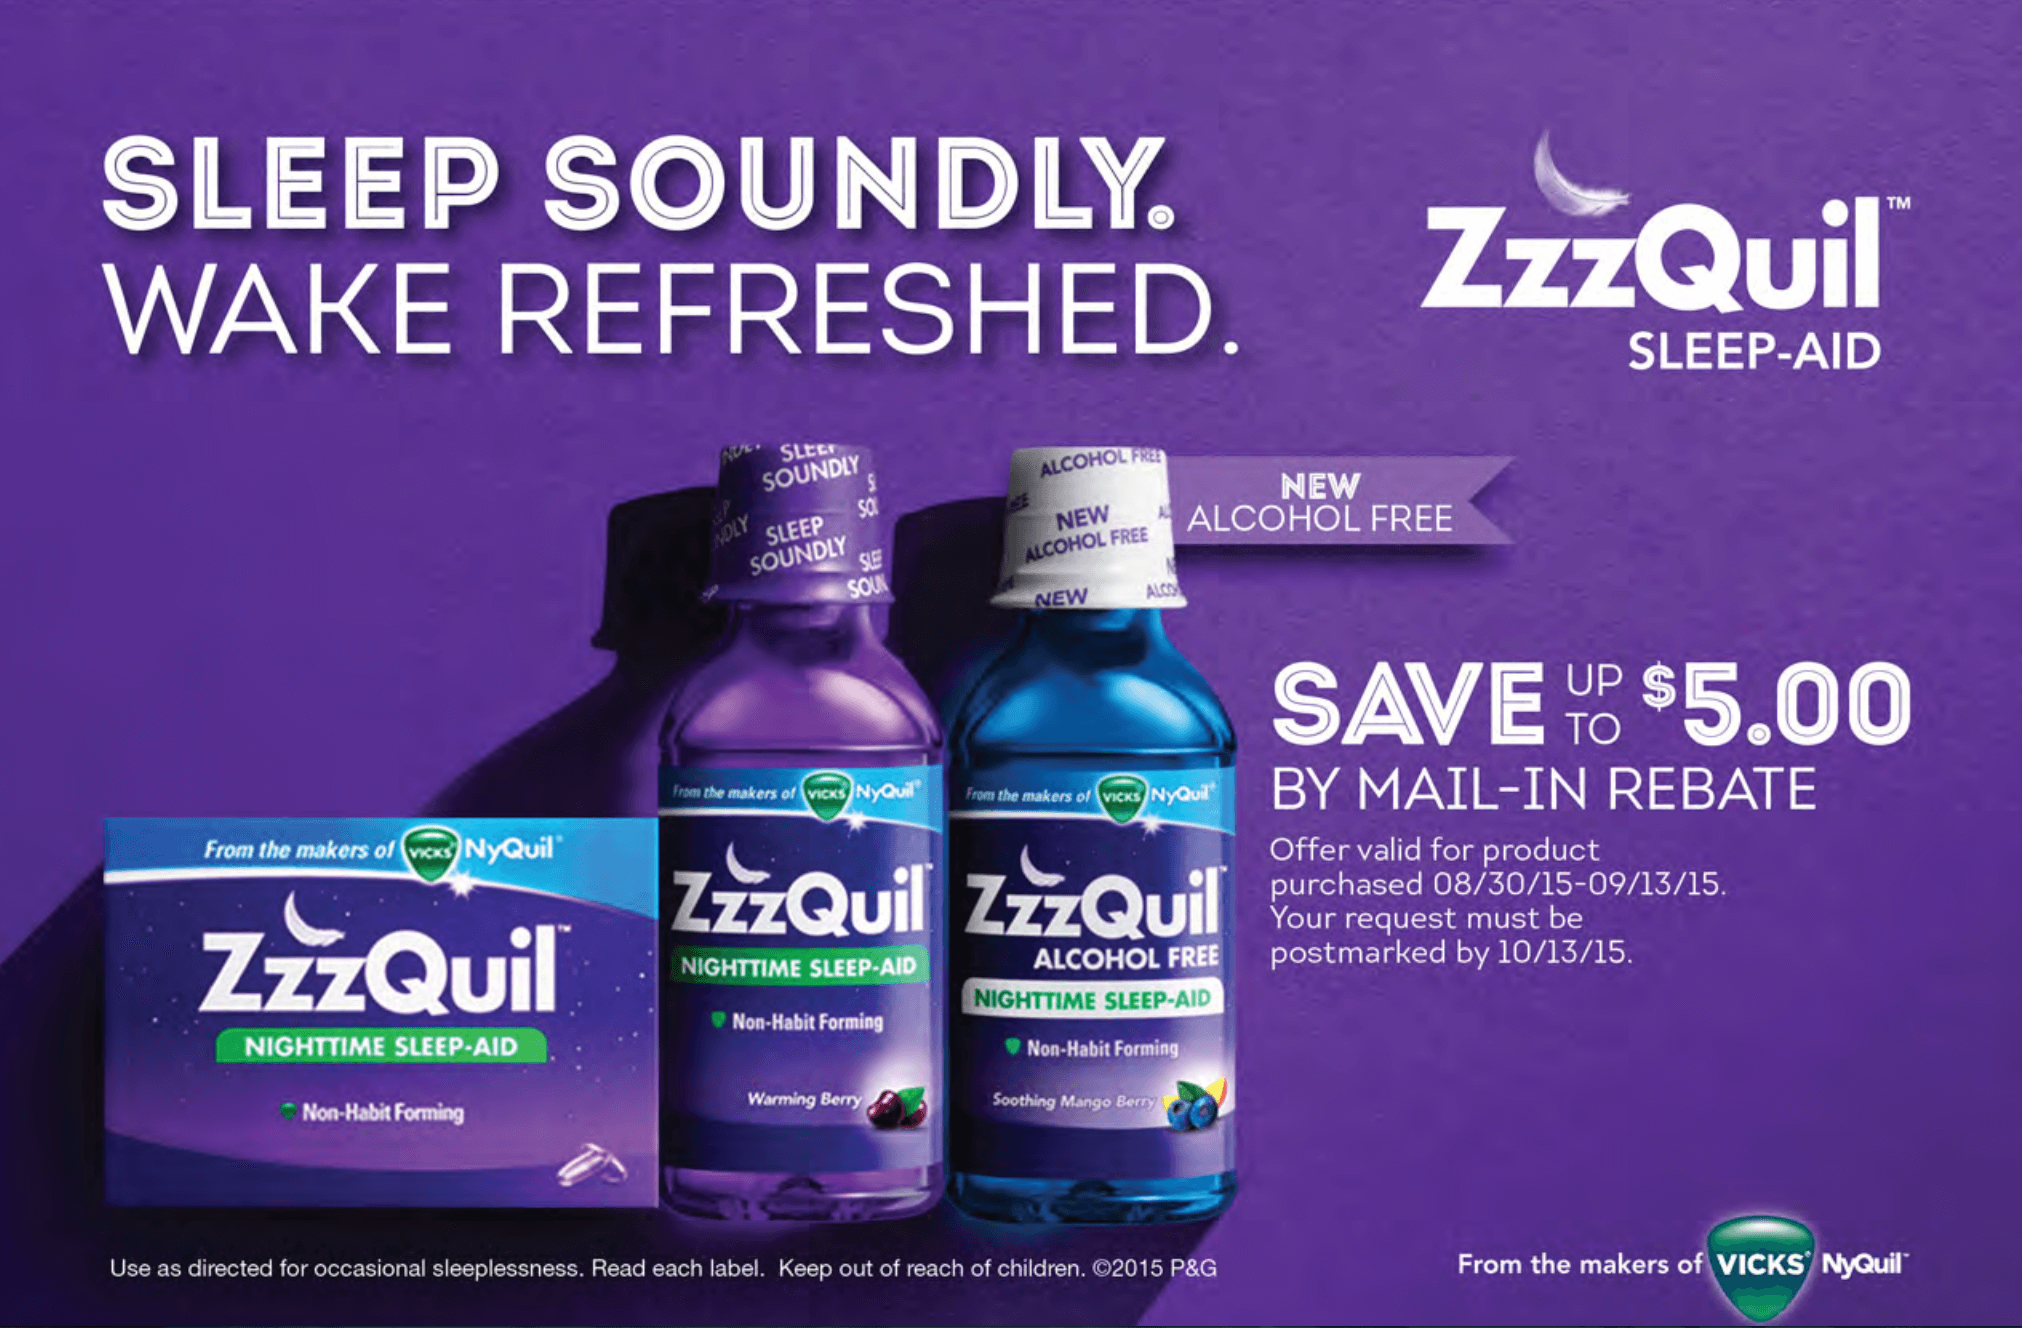 free-zzzquil-sleep-aid-at-cvs-mail-in-rebate-living-rich-with-coupons